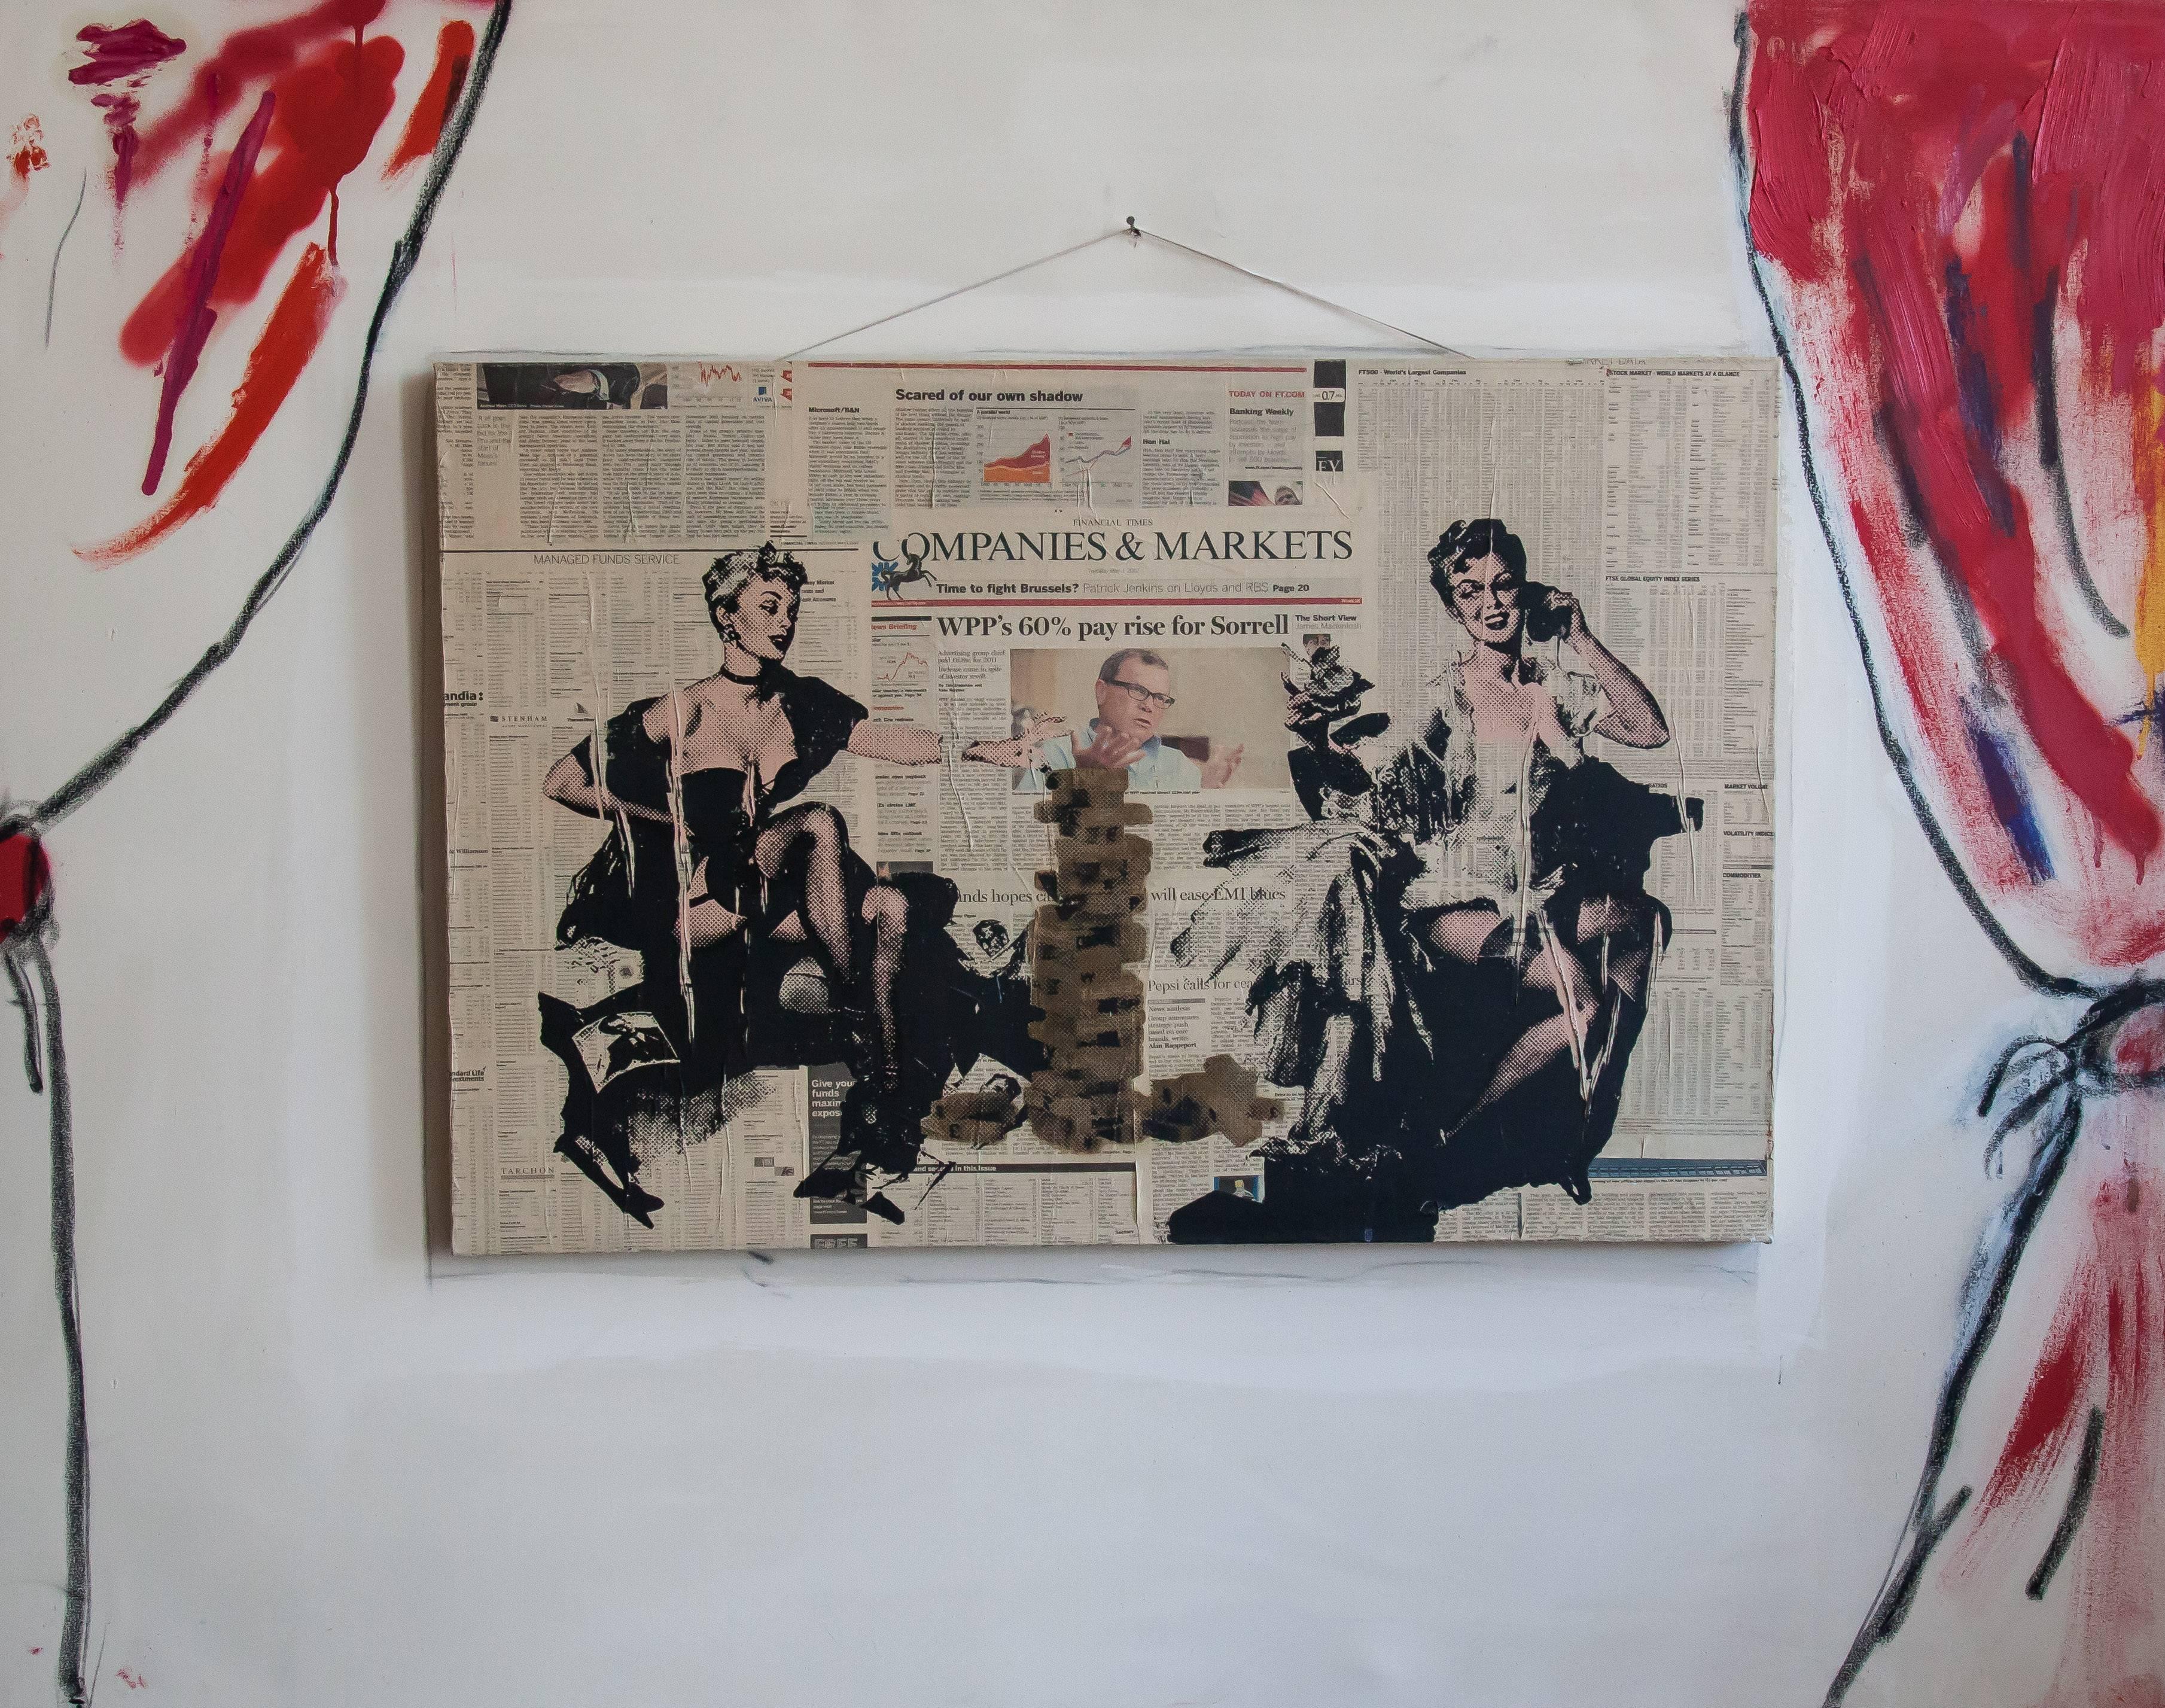 Play Original Multinationals, Pin Up girls, CEO oil on Canvas Counter Propaganda - Mixed Media Art by Luc Waring